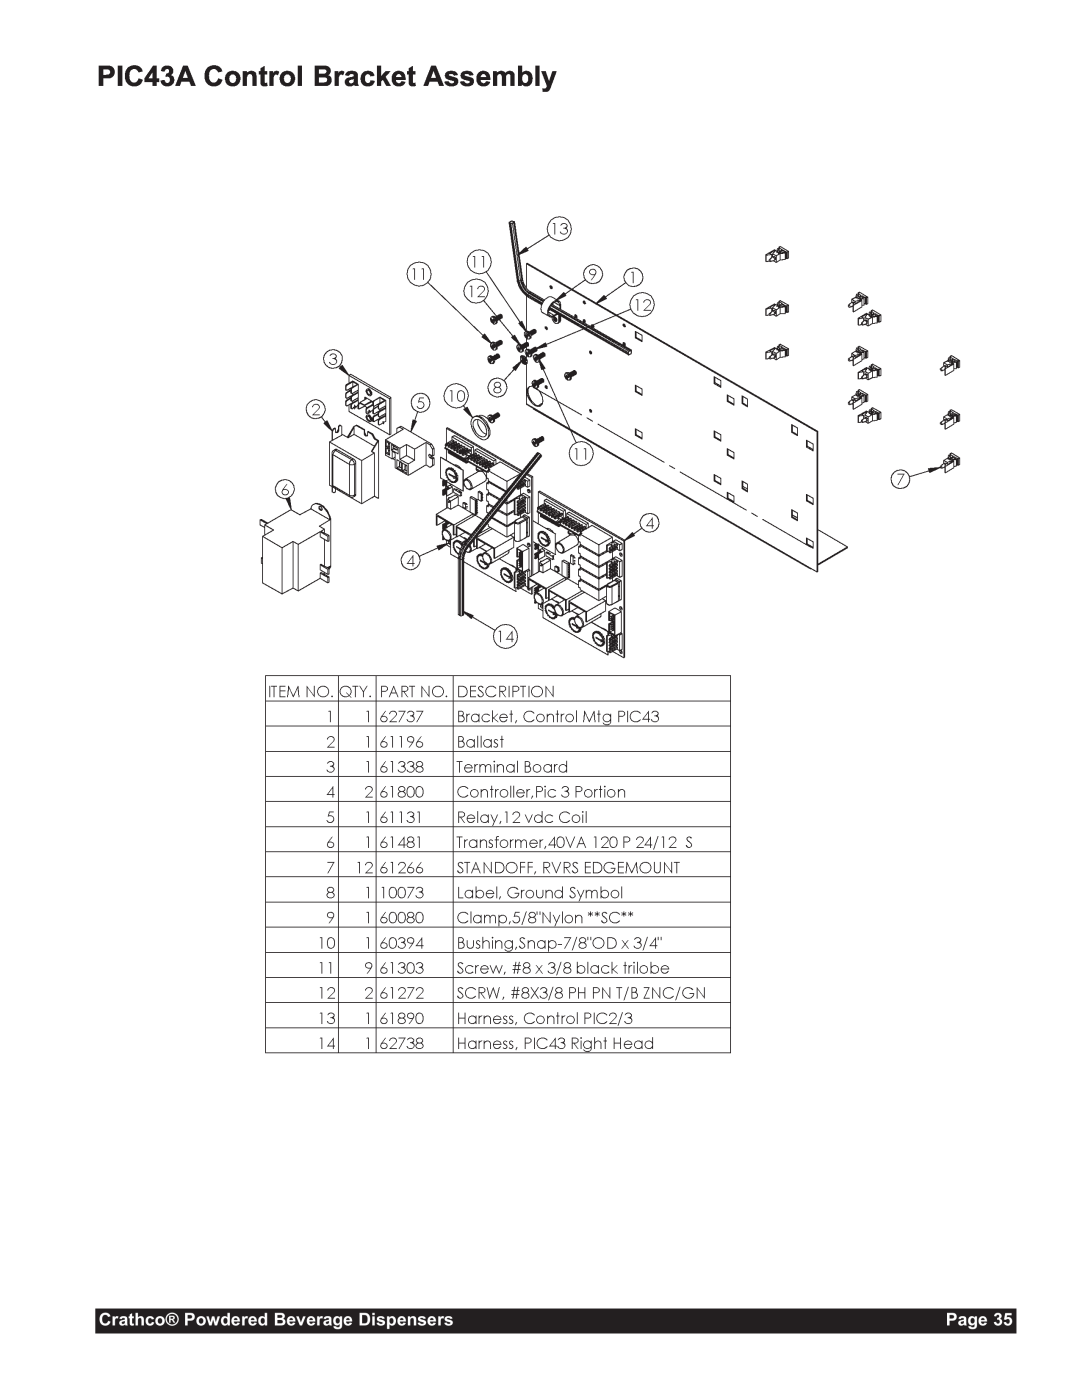 Grindmaster CC-302-20 service manual PIC43A Control Bracket Assembly, Crathco Powdered Beverage Dispensers, Page 